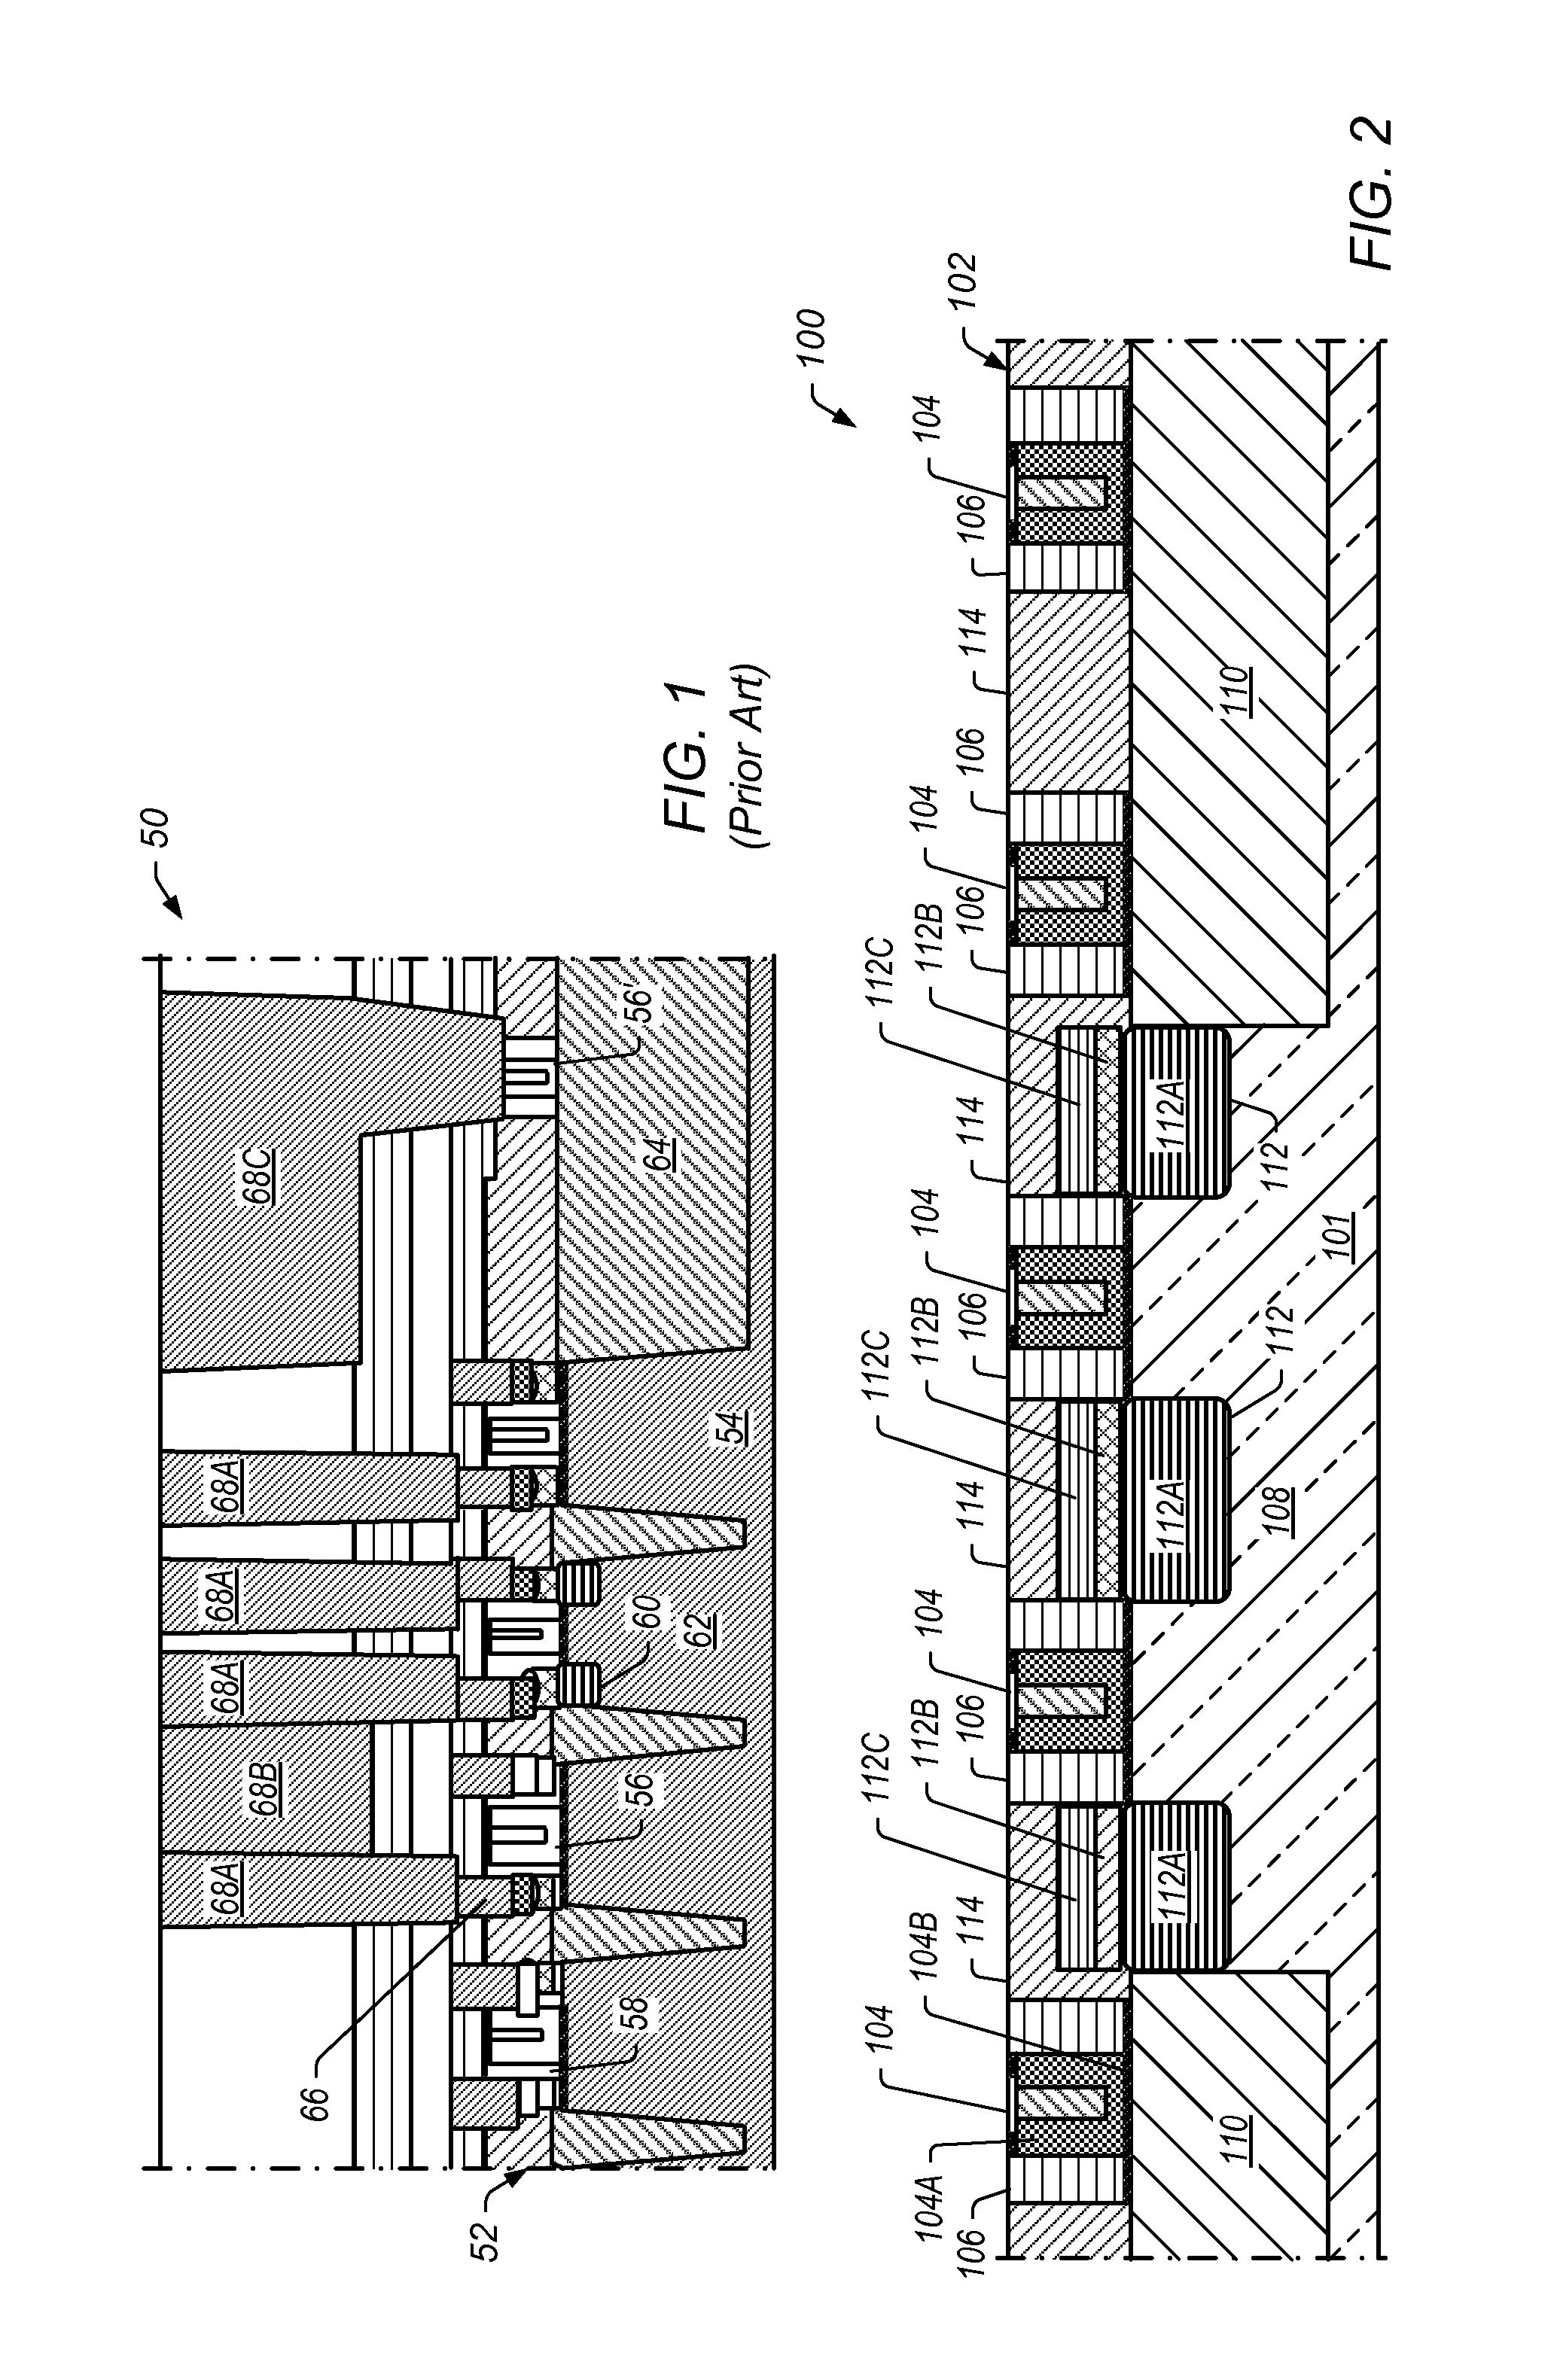 Self-aligned trench contact and local interconnect with replacement gate process